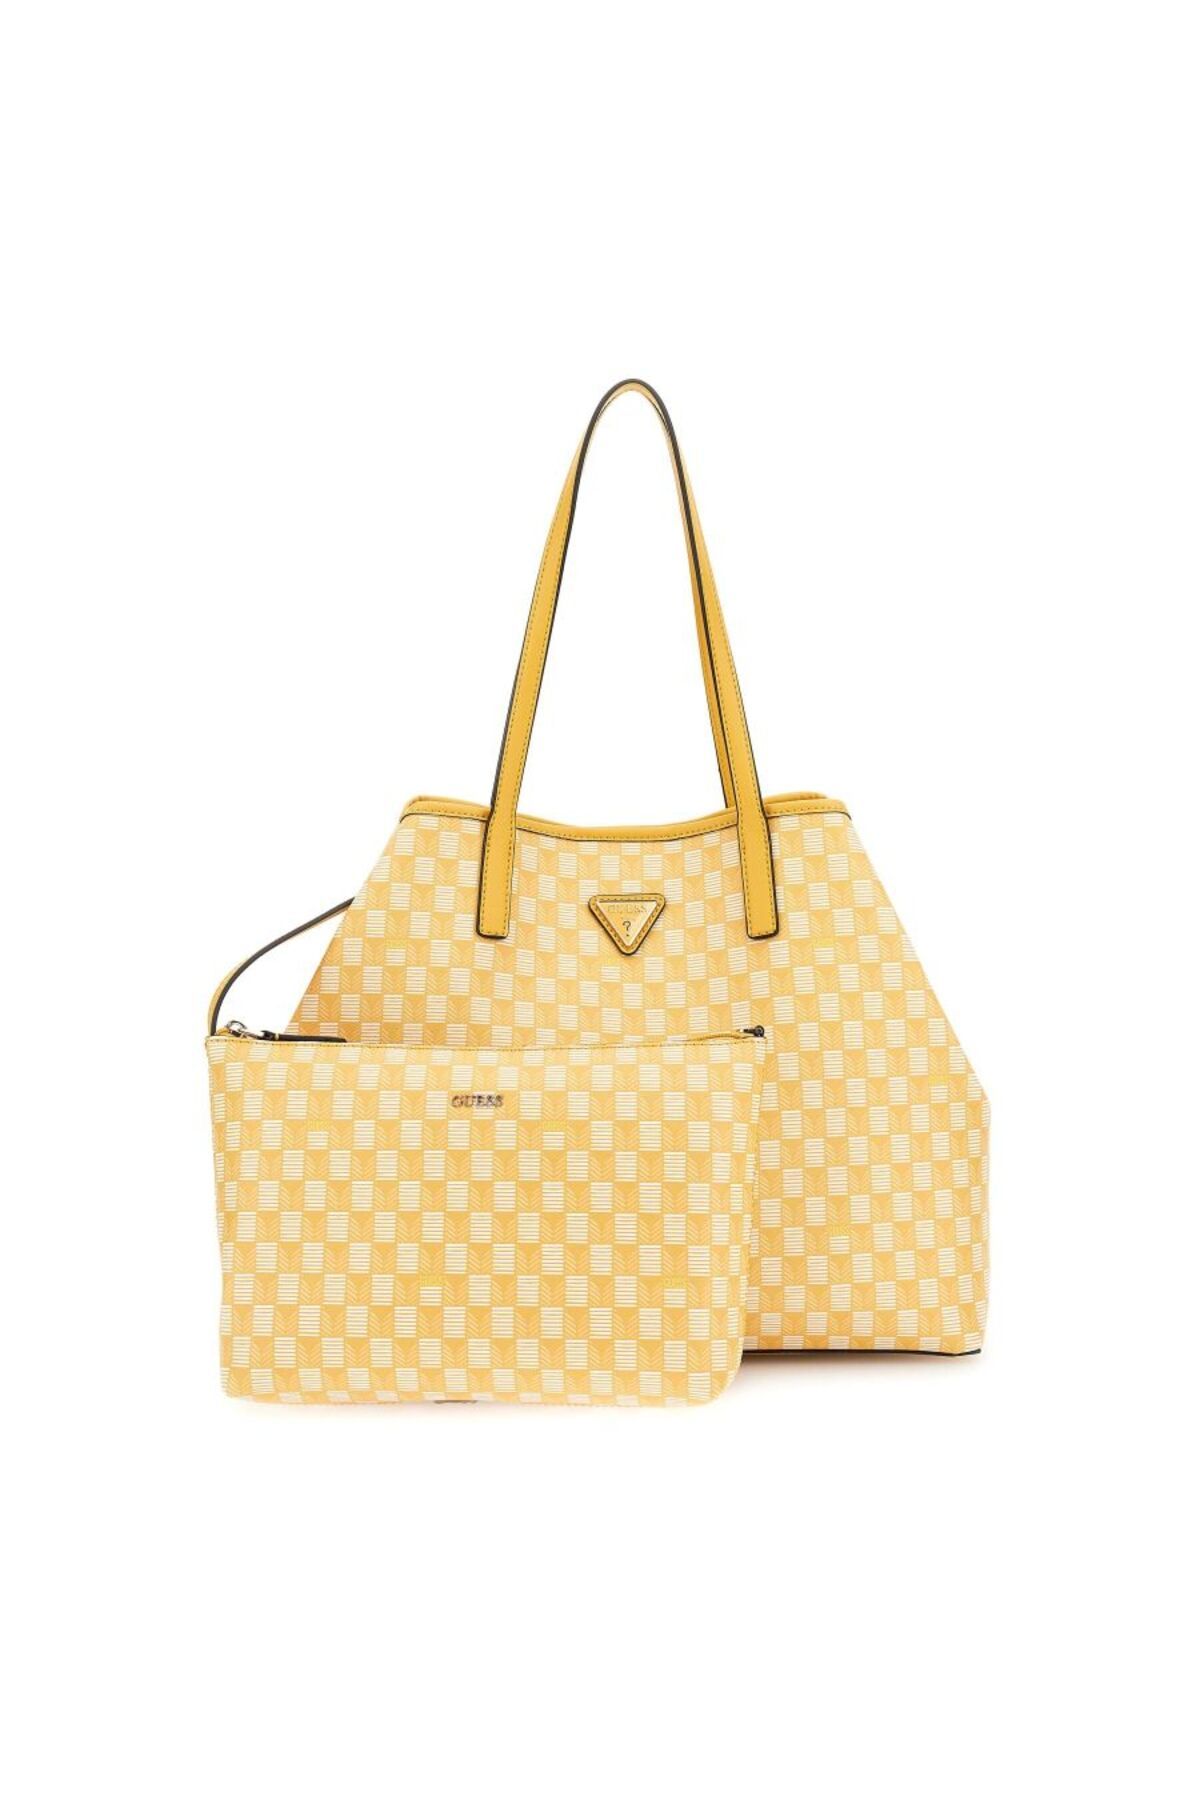 Guess VIKKY II LARGE TOTE